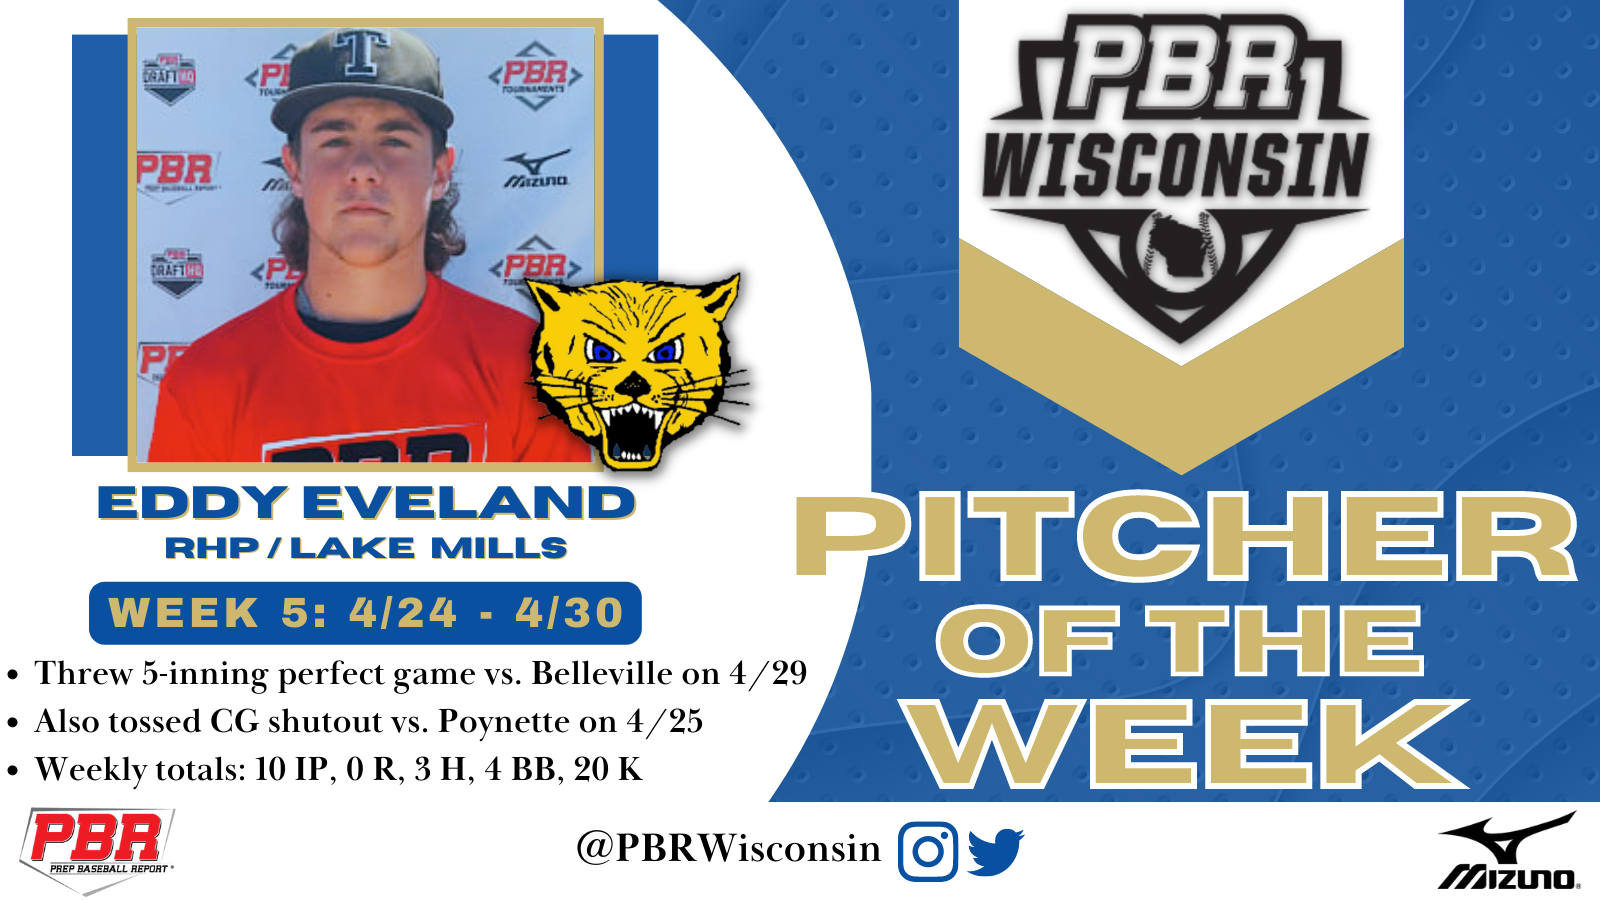 PBR Wisconsin Player of the Week